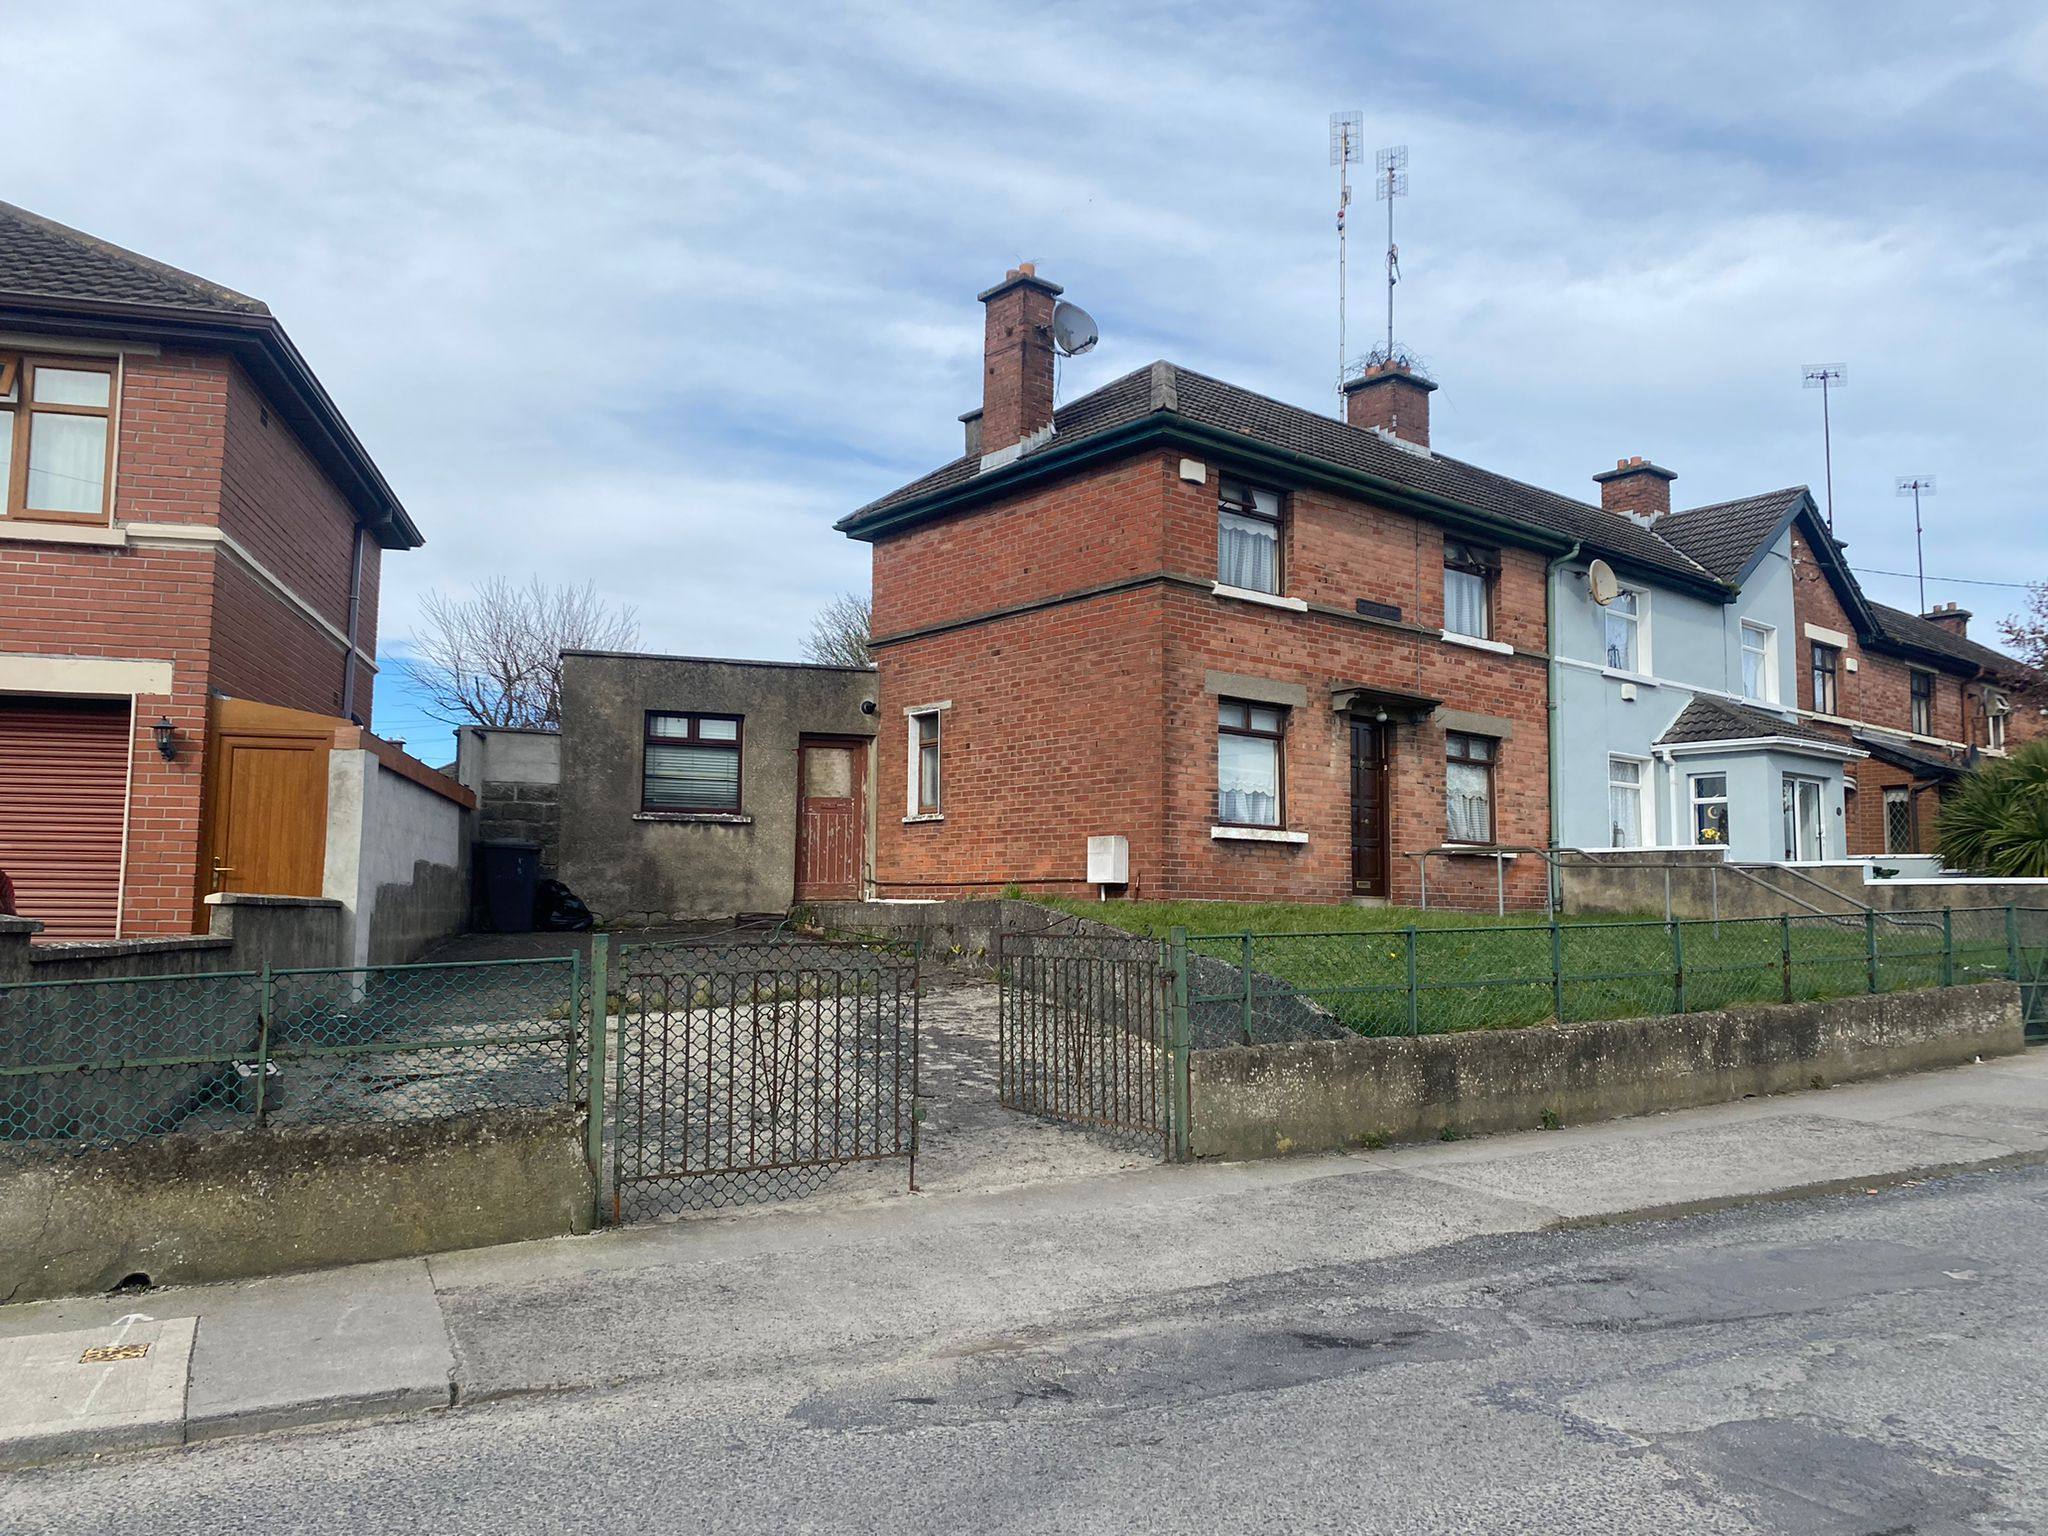 161 Pearse Park, Drogheda, Co Louth.